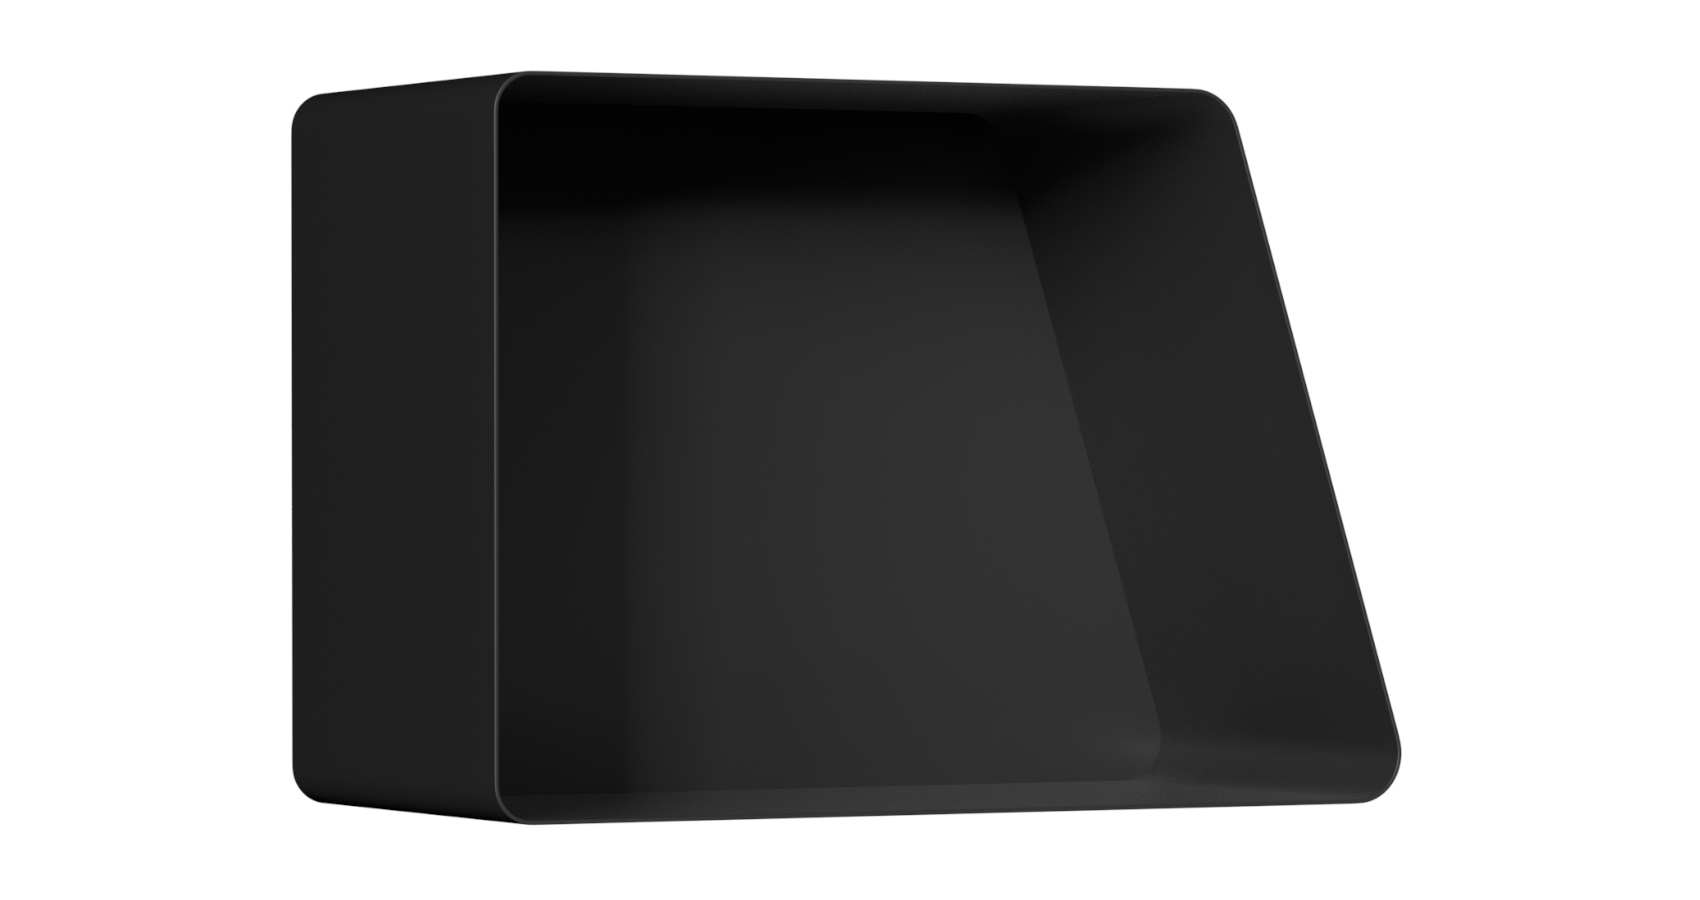 Pixa Wall Mounted closed shelf in black in front view